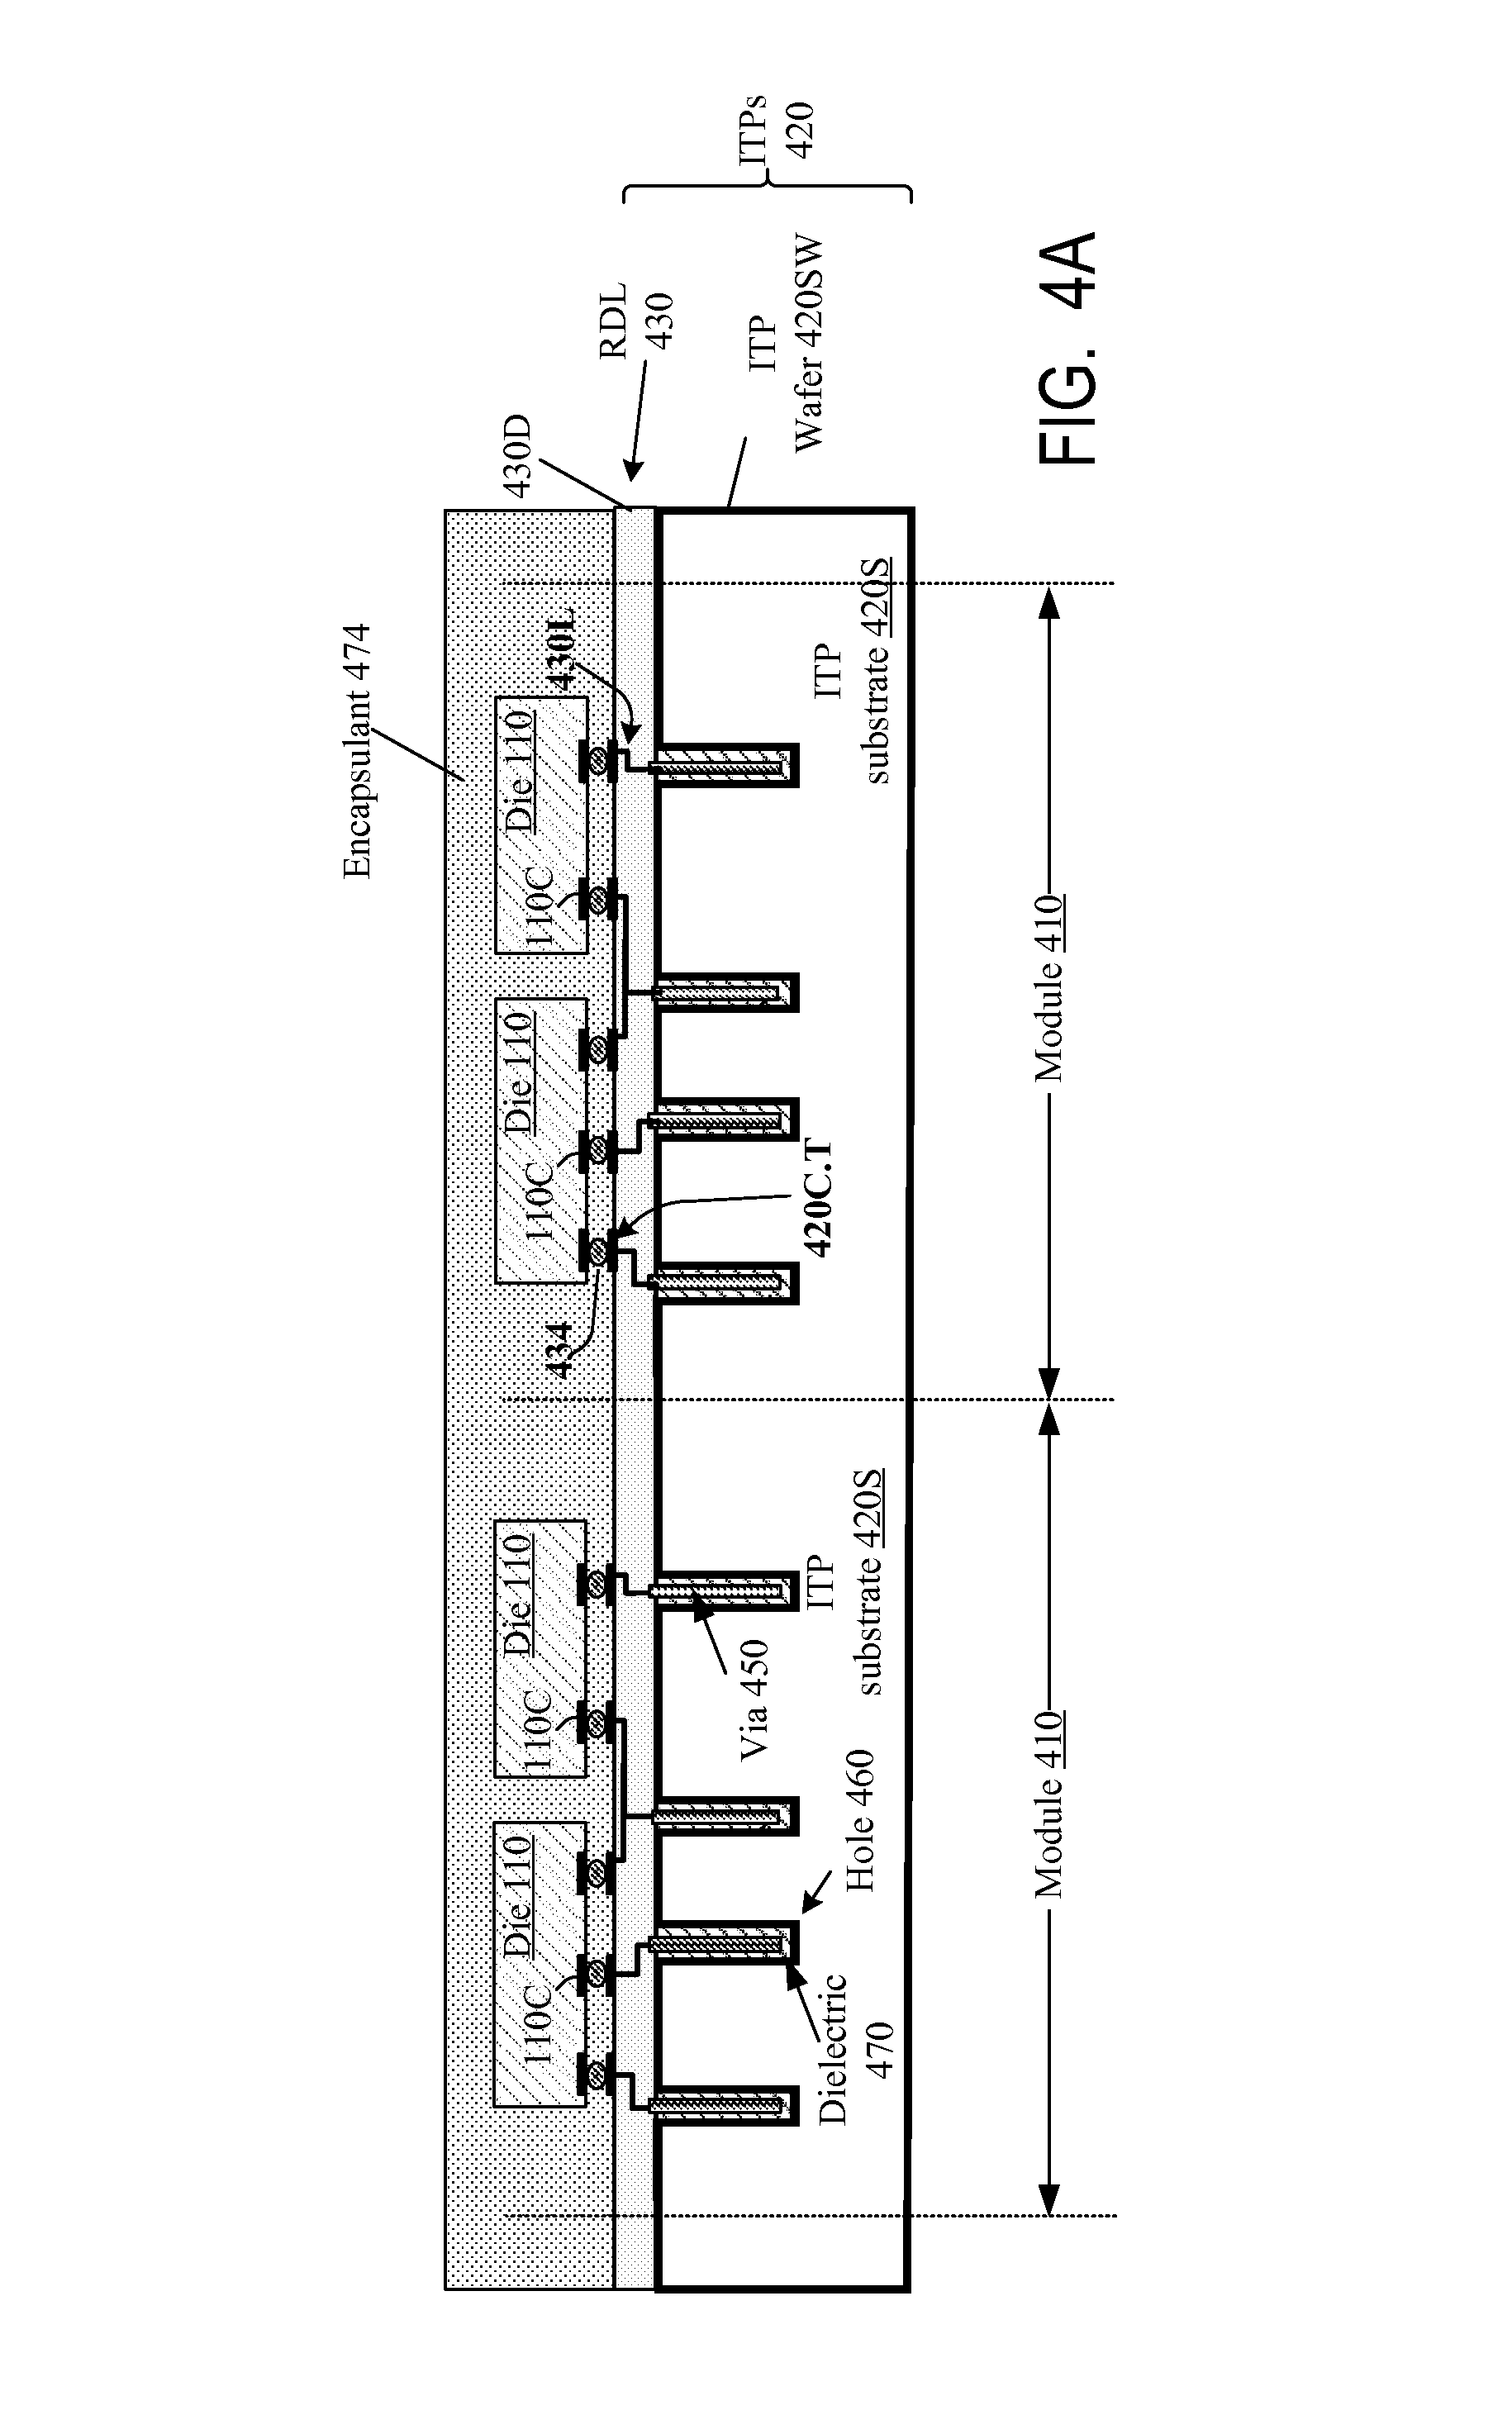 Microelectronic assemblies with cavities, and methods of fabrication